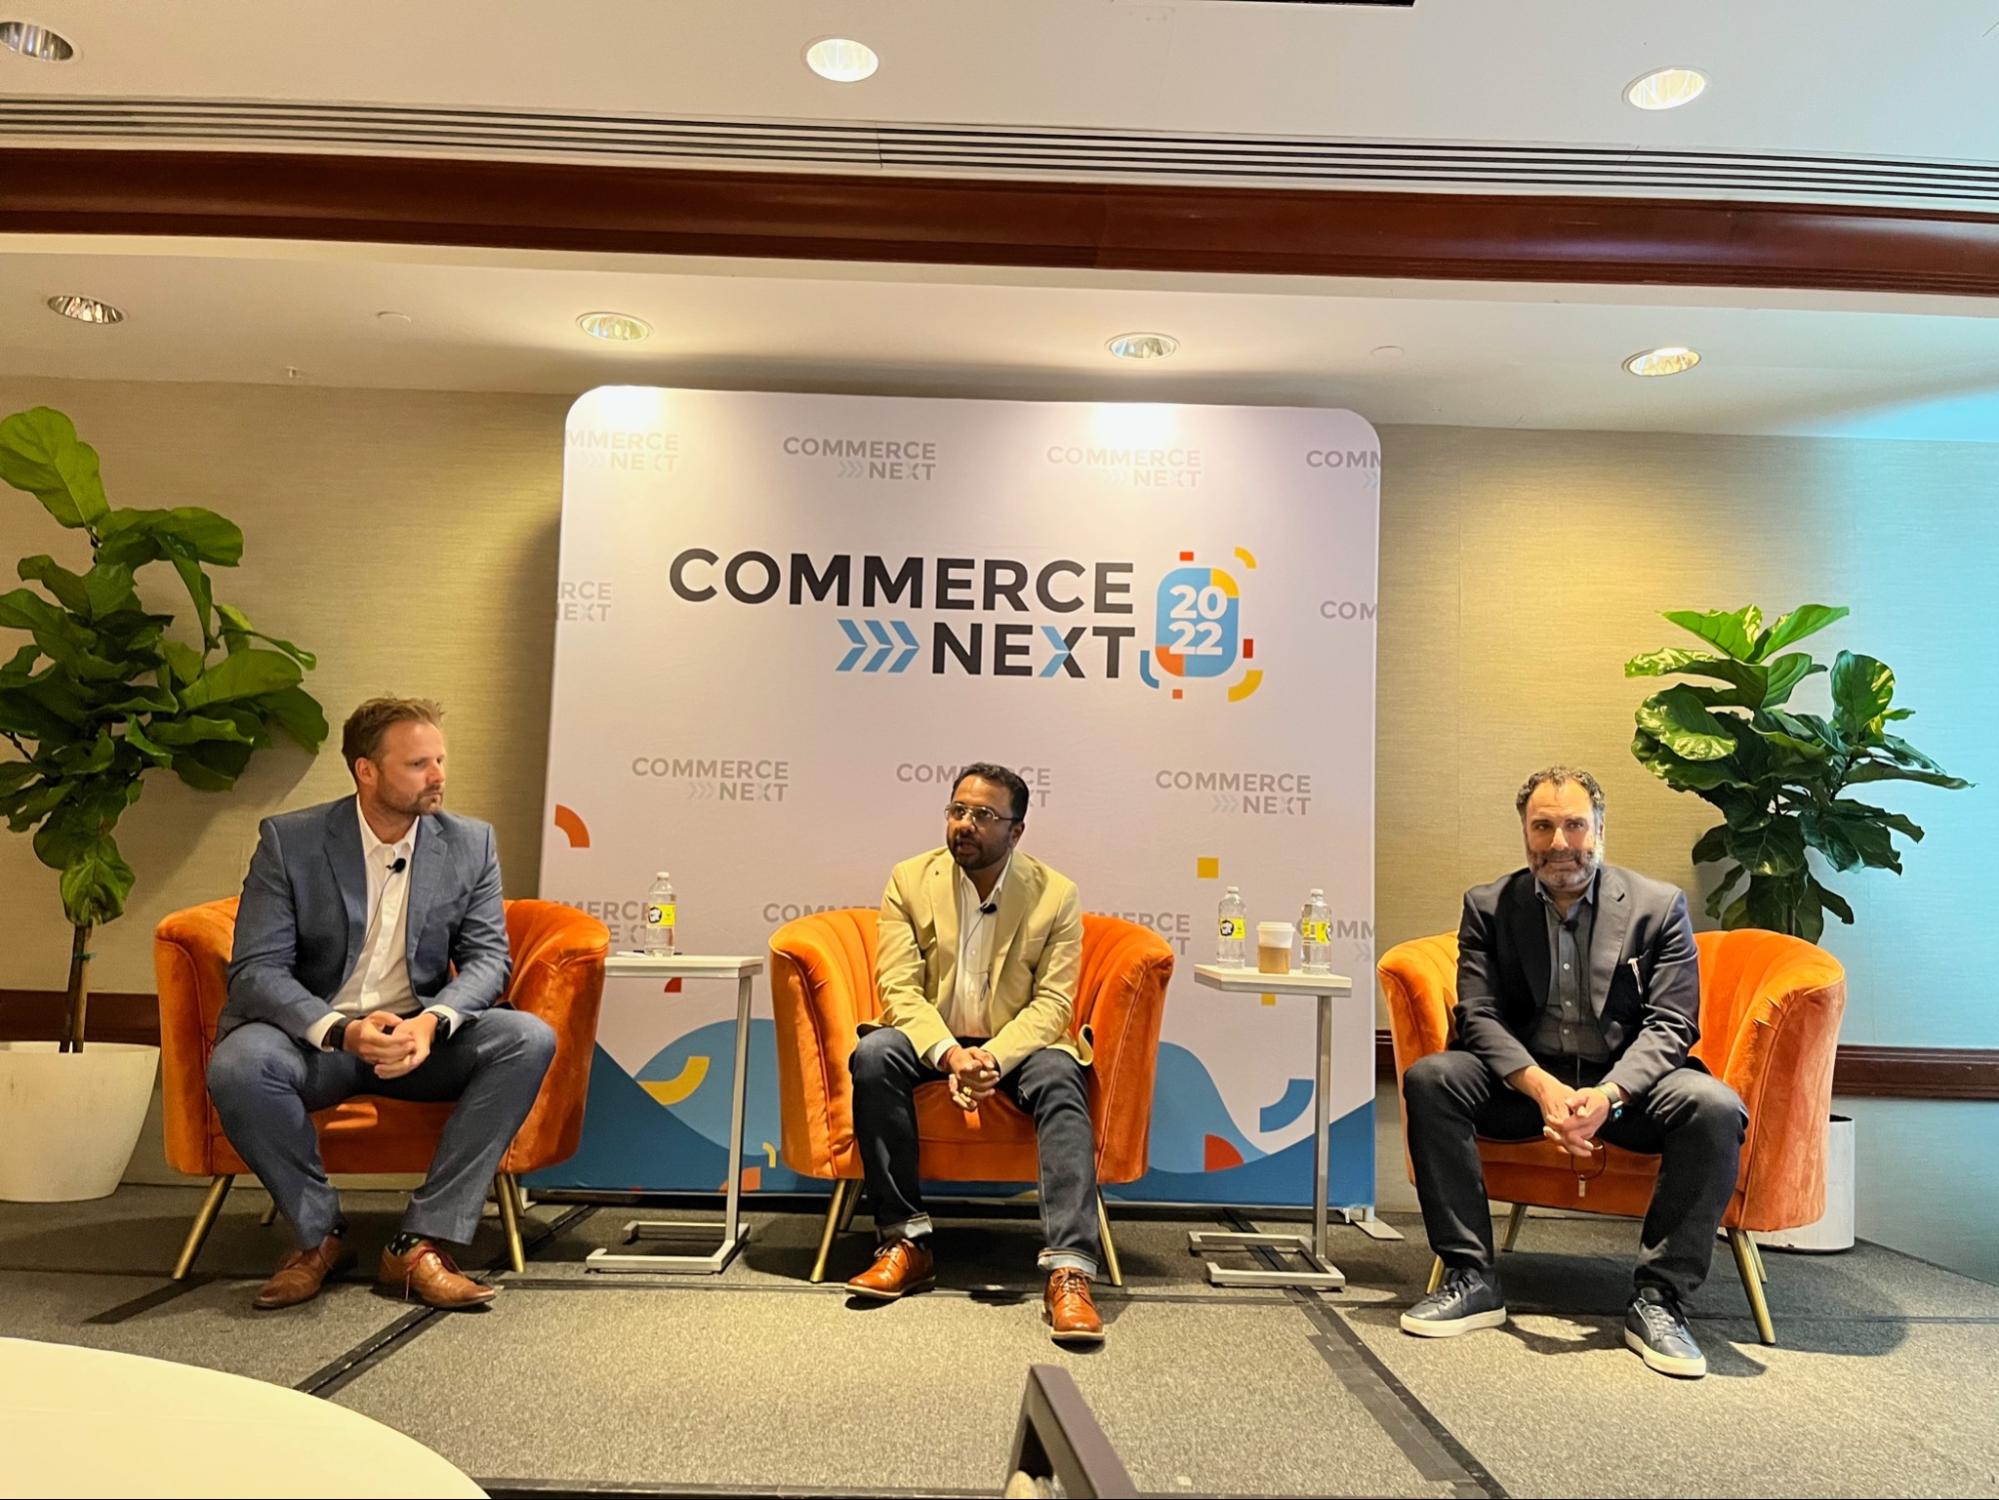 session about how relevant are the metaverse, blockchain and cryptocurrencies at commercenext